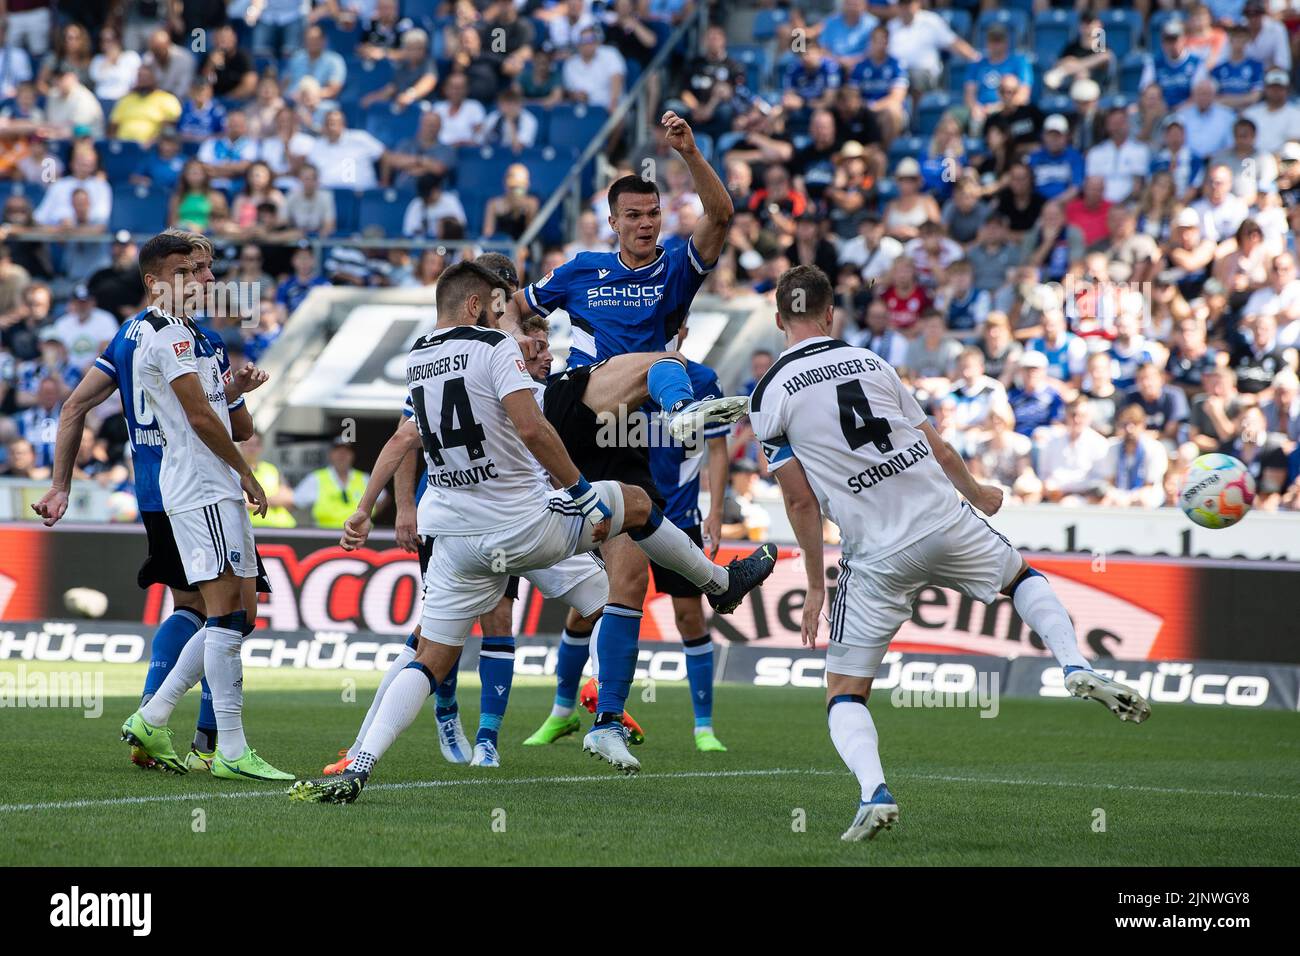 Bielefeld, Germany. 13th Aug, 2022. Soccer: 2. Bundesliga, Arminia Bielefeld - Hamburger SV, Matchday 4, Schüco Arena. Bielefeld's Frederik Jäkel shoots at goal. Hamburg's Sebastian Schonlau is on the right. Credit: Swen Pförtner/dpa - IMPORTANT NOTE: In accordance with the requirements of the DFL Deutsche Fußball Liga and the DFB Deutscher Fußball-Bund, it is prohibited to use or have used photographs taken in the stadium and/or of the match in the form of sequence pictures and/or video-like photo series./dpa/Alamy Live News Stock Photo